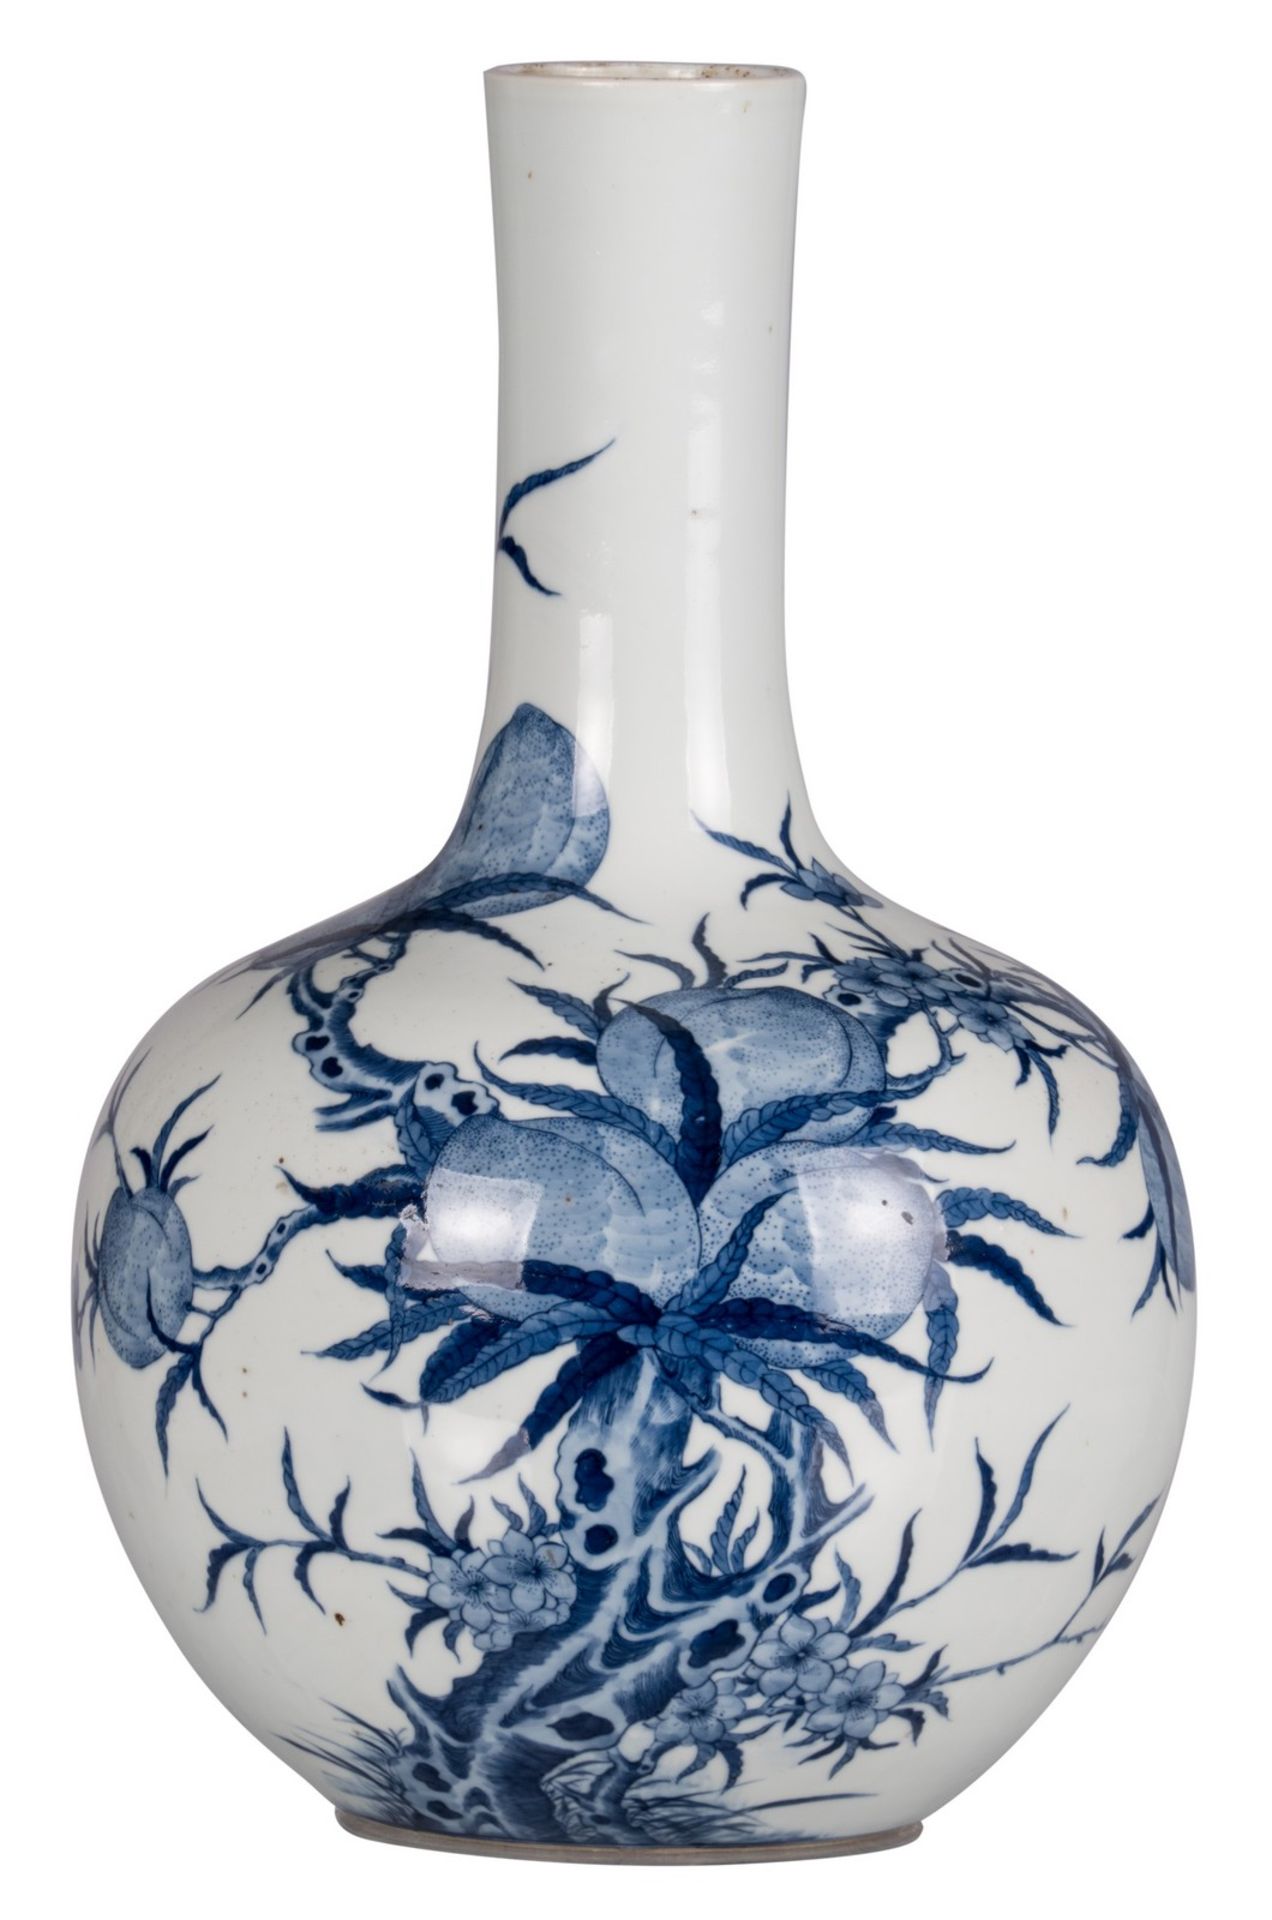 A Chinese blue and white nine peaches bottle vase, marked Qianlong, H 38,5 cm